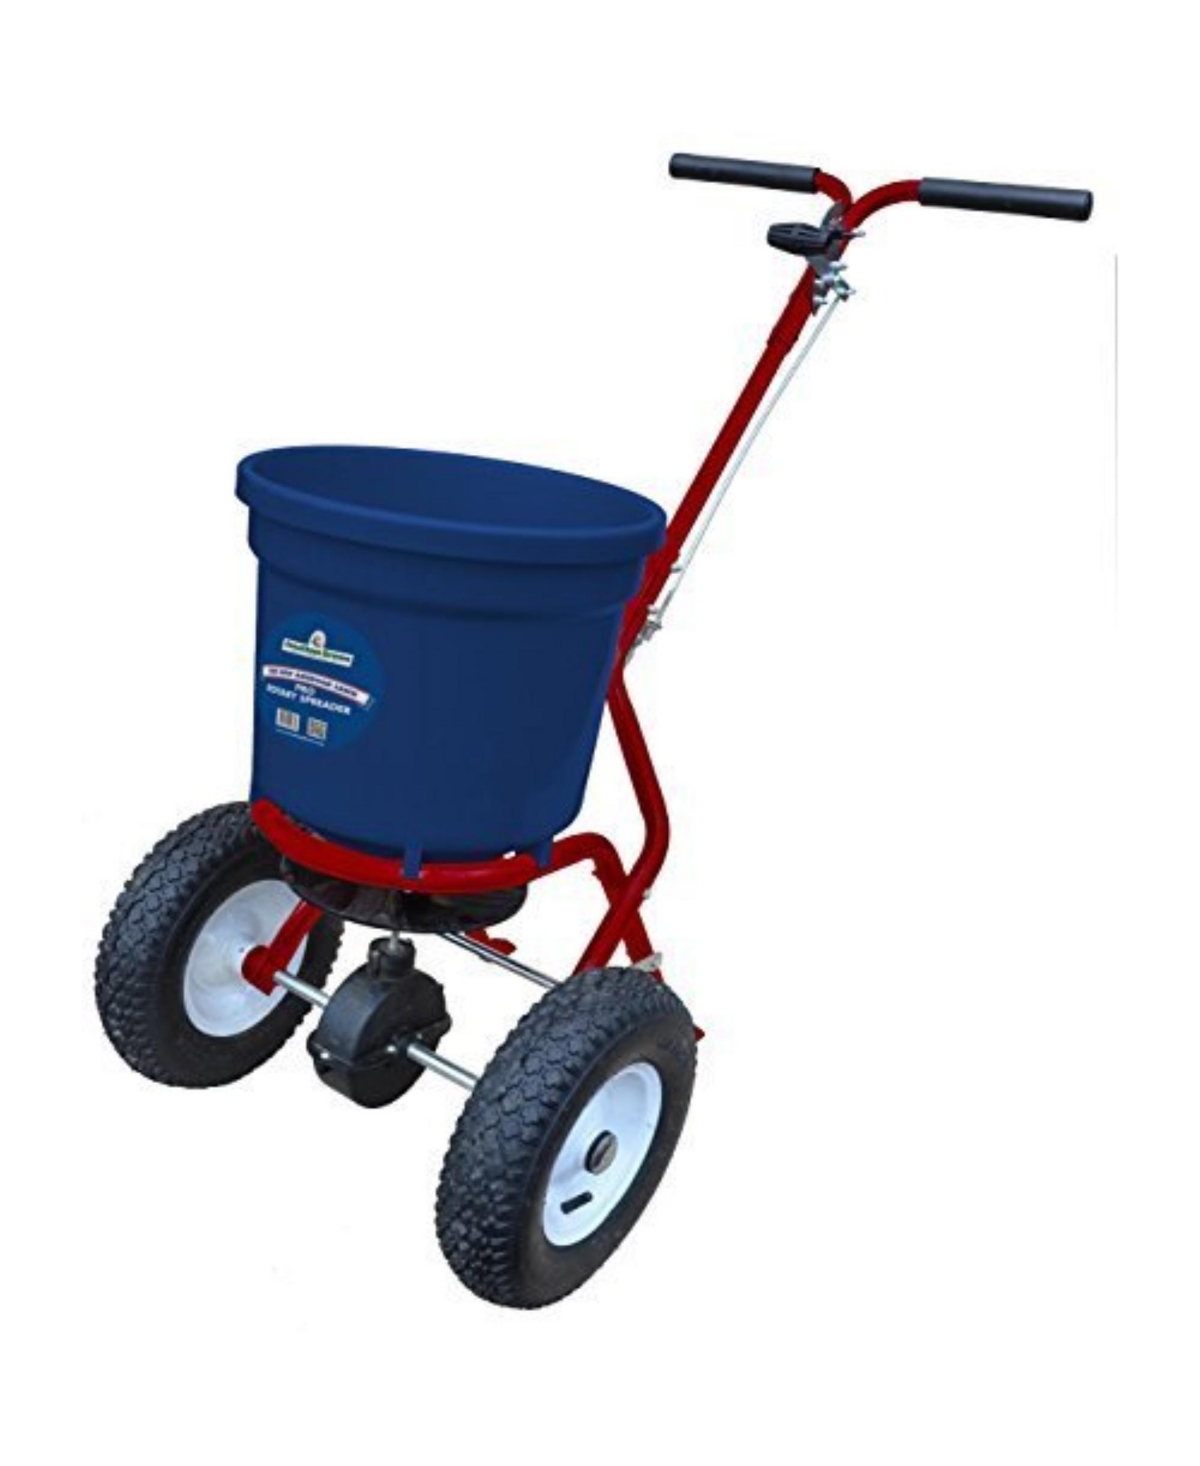 10938 New American Lawn Rotary Spreader, Deluxe - Light Heather Grey